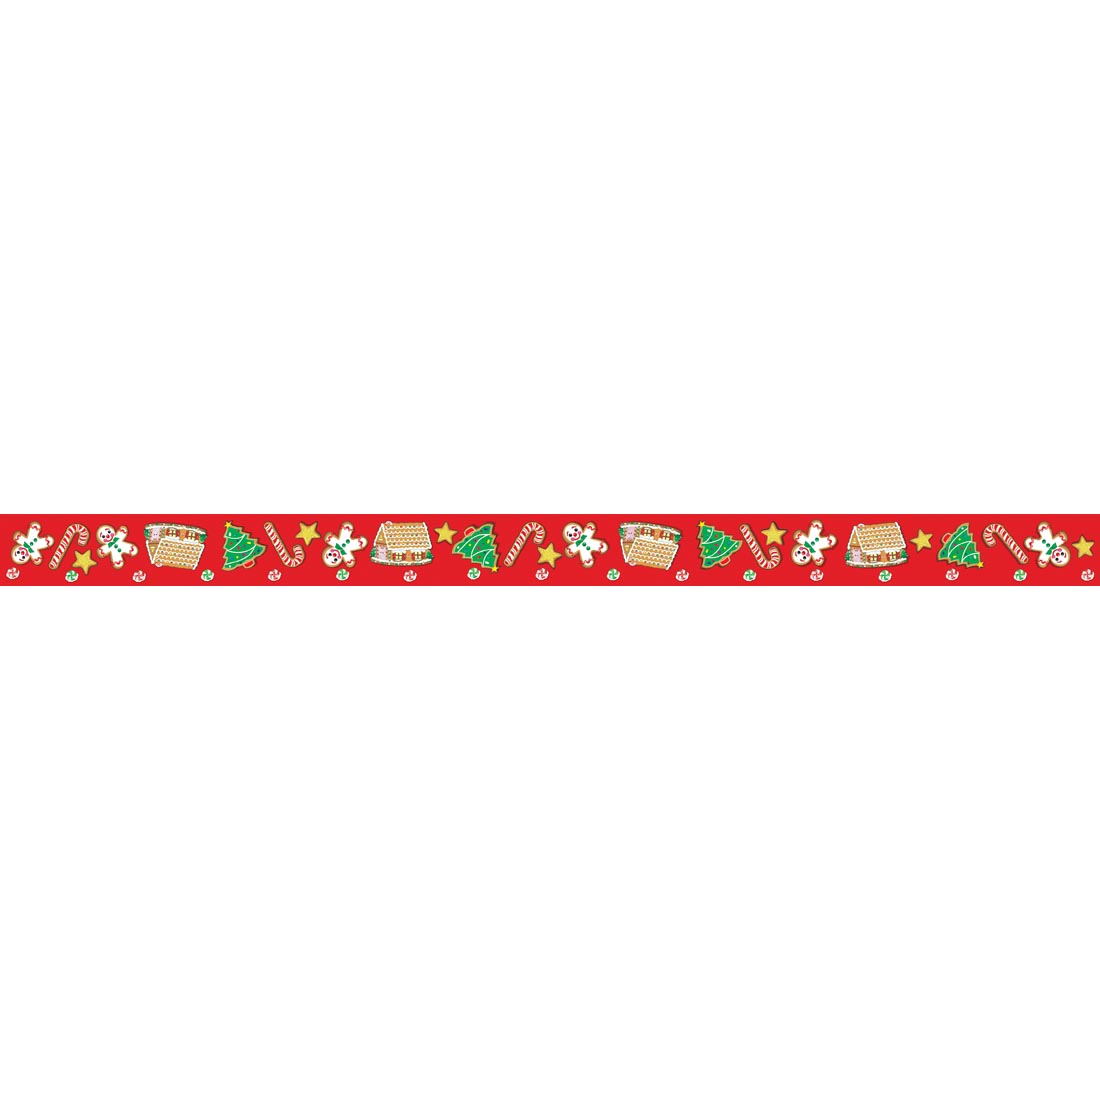 Christmas Border Trim with gingerbread houses, candy canes, Christmas trees and gingerbread cookies